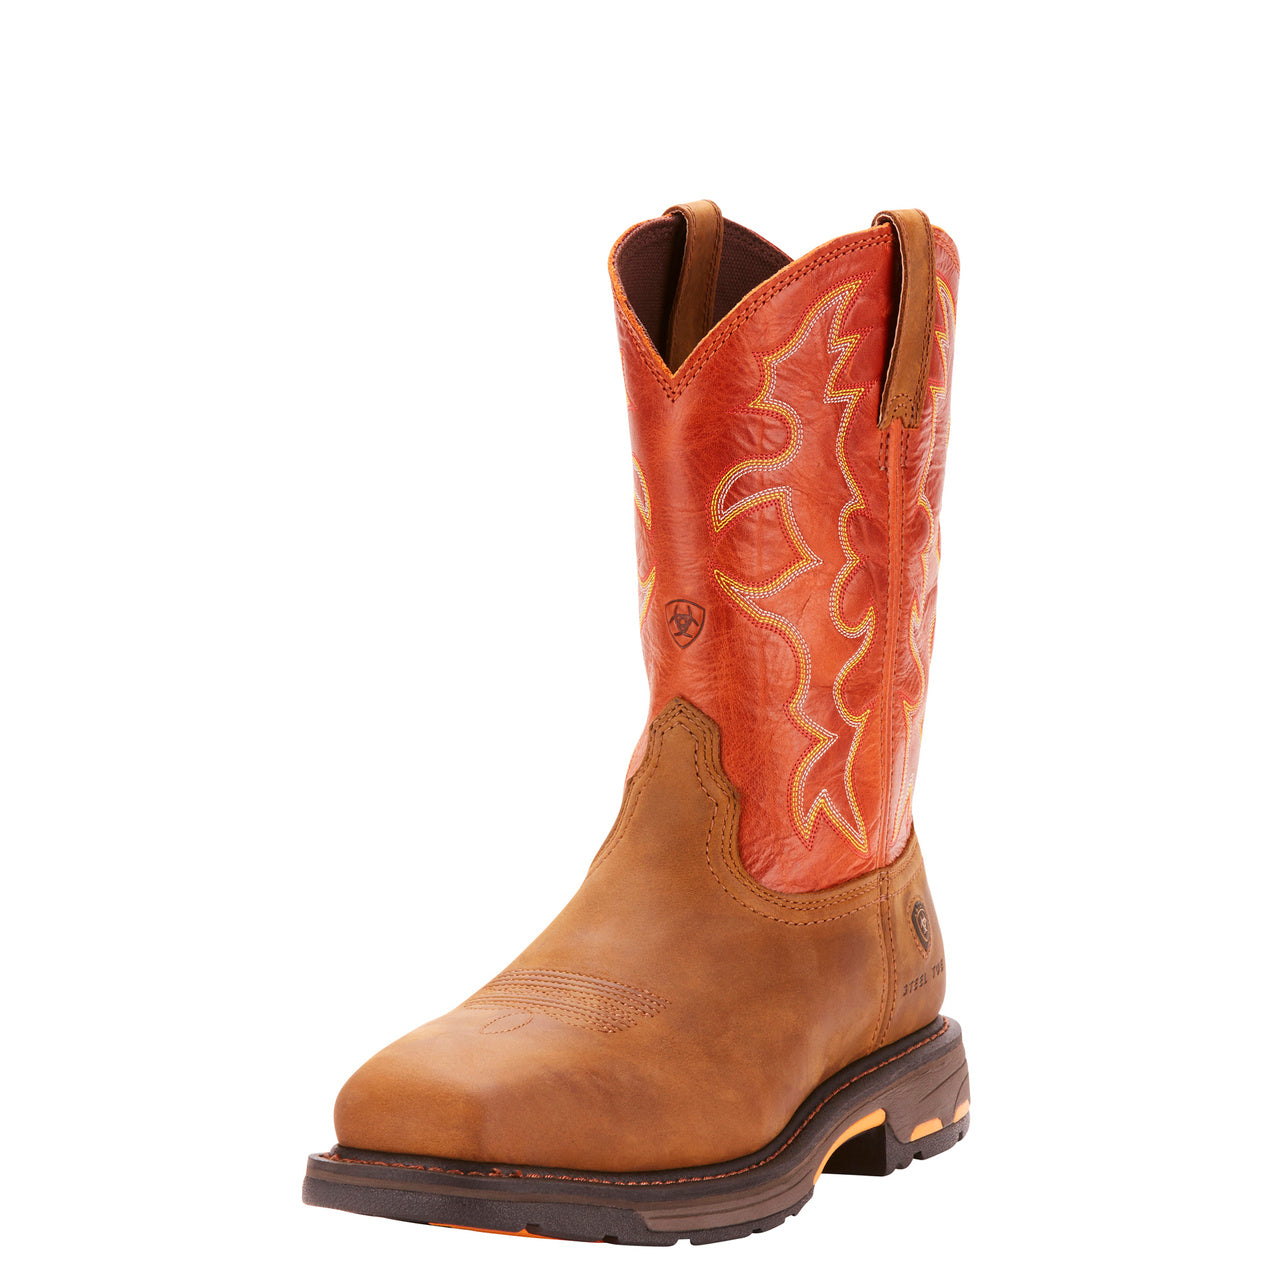 Ariat Workhog Wide Square Toe Boot 9 EE